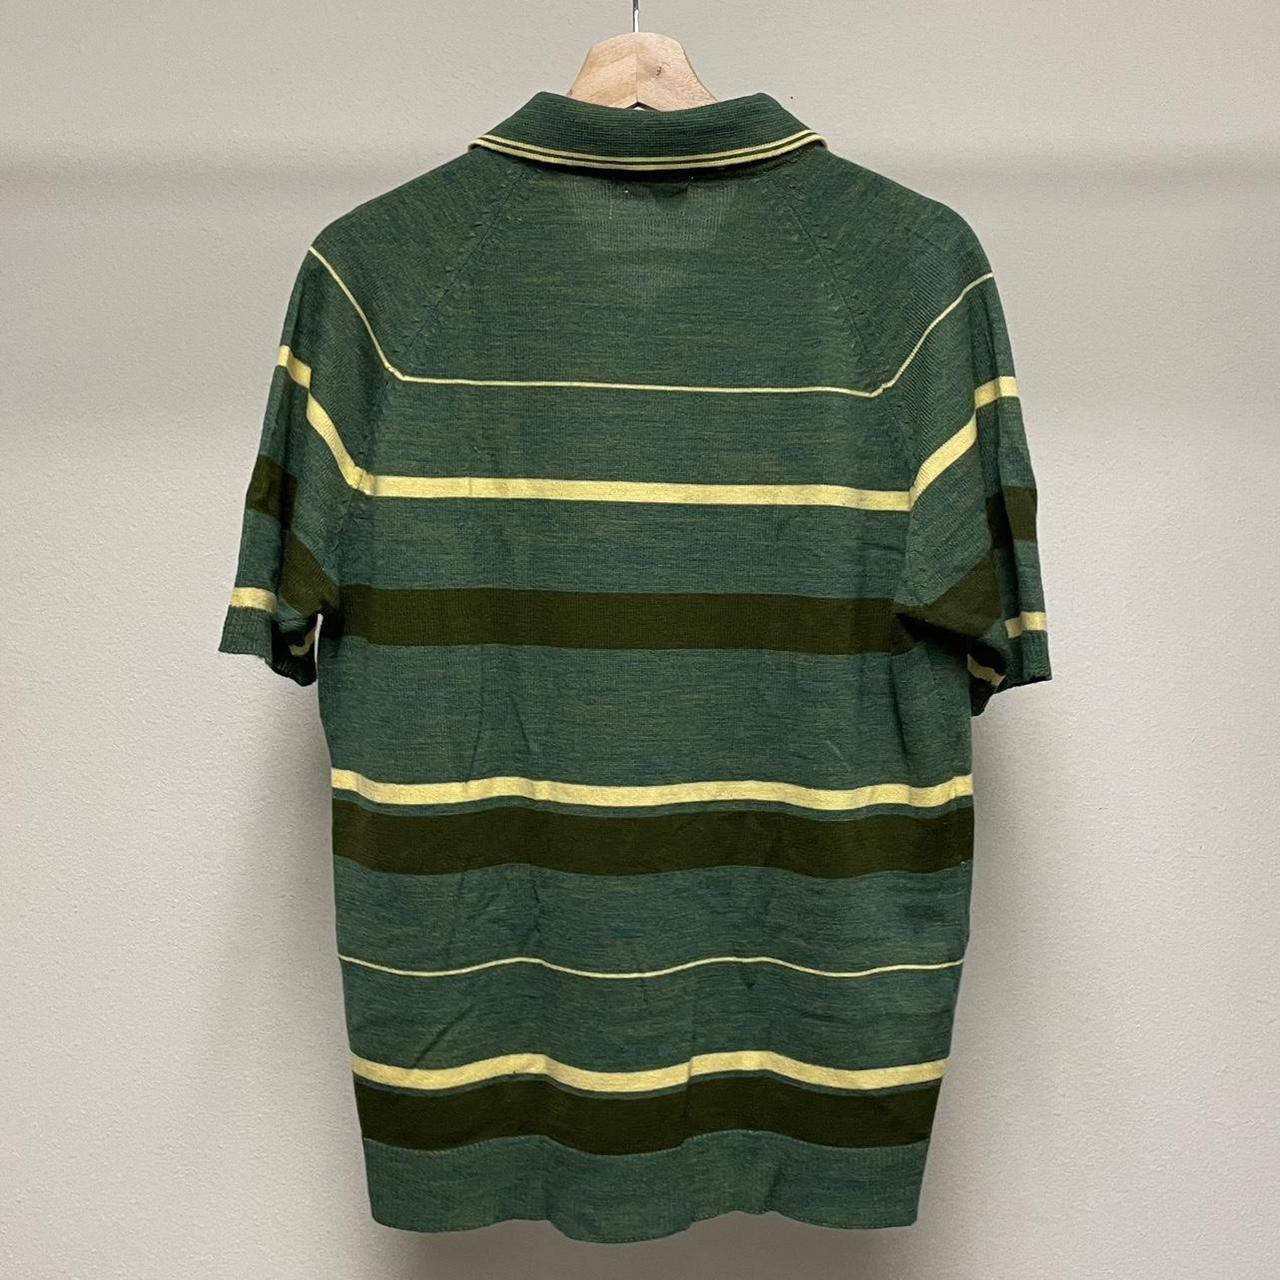 Vintage knit polo shirt 1960s green and yellow... - Depop